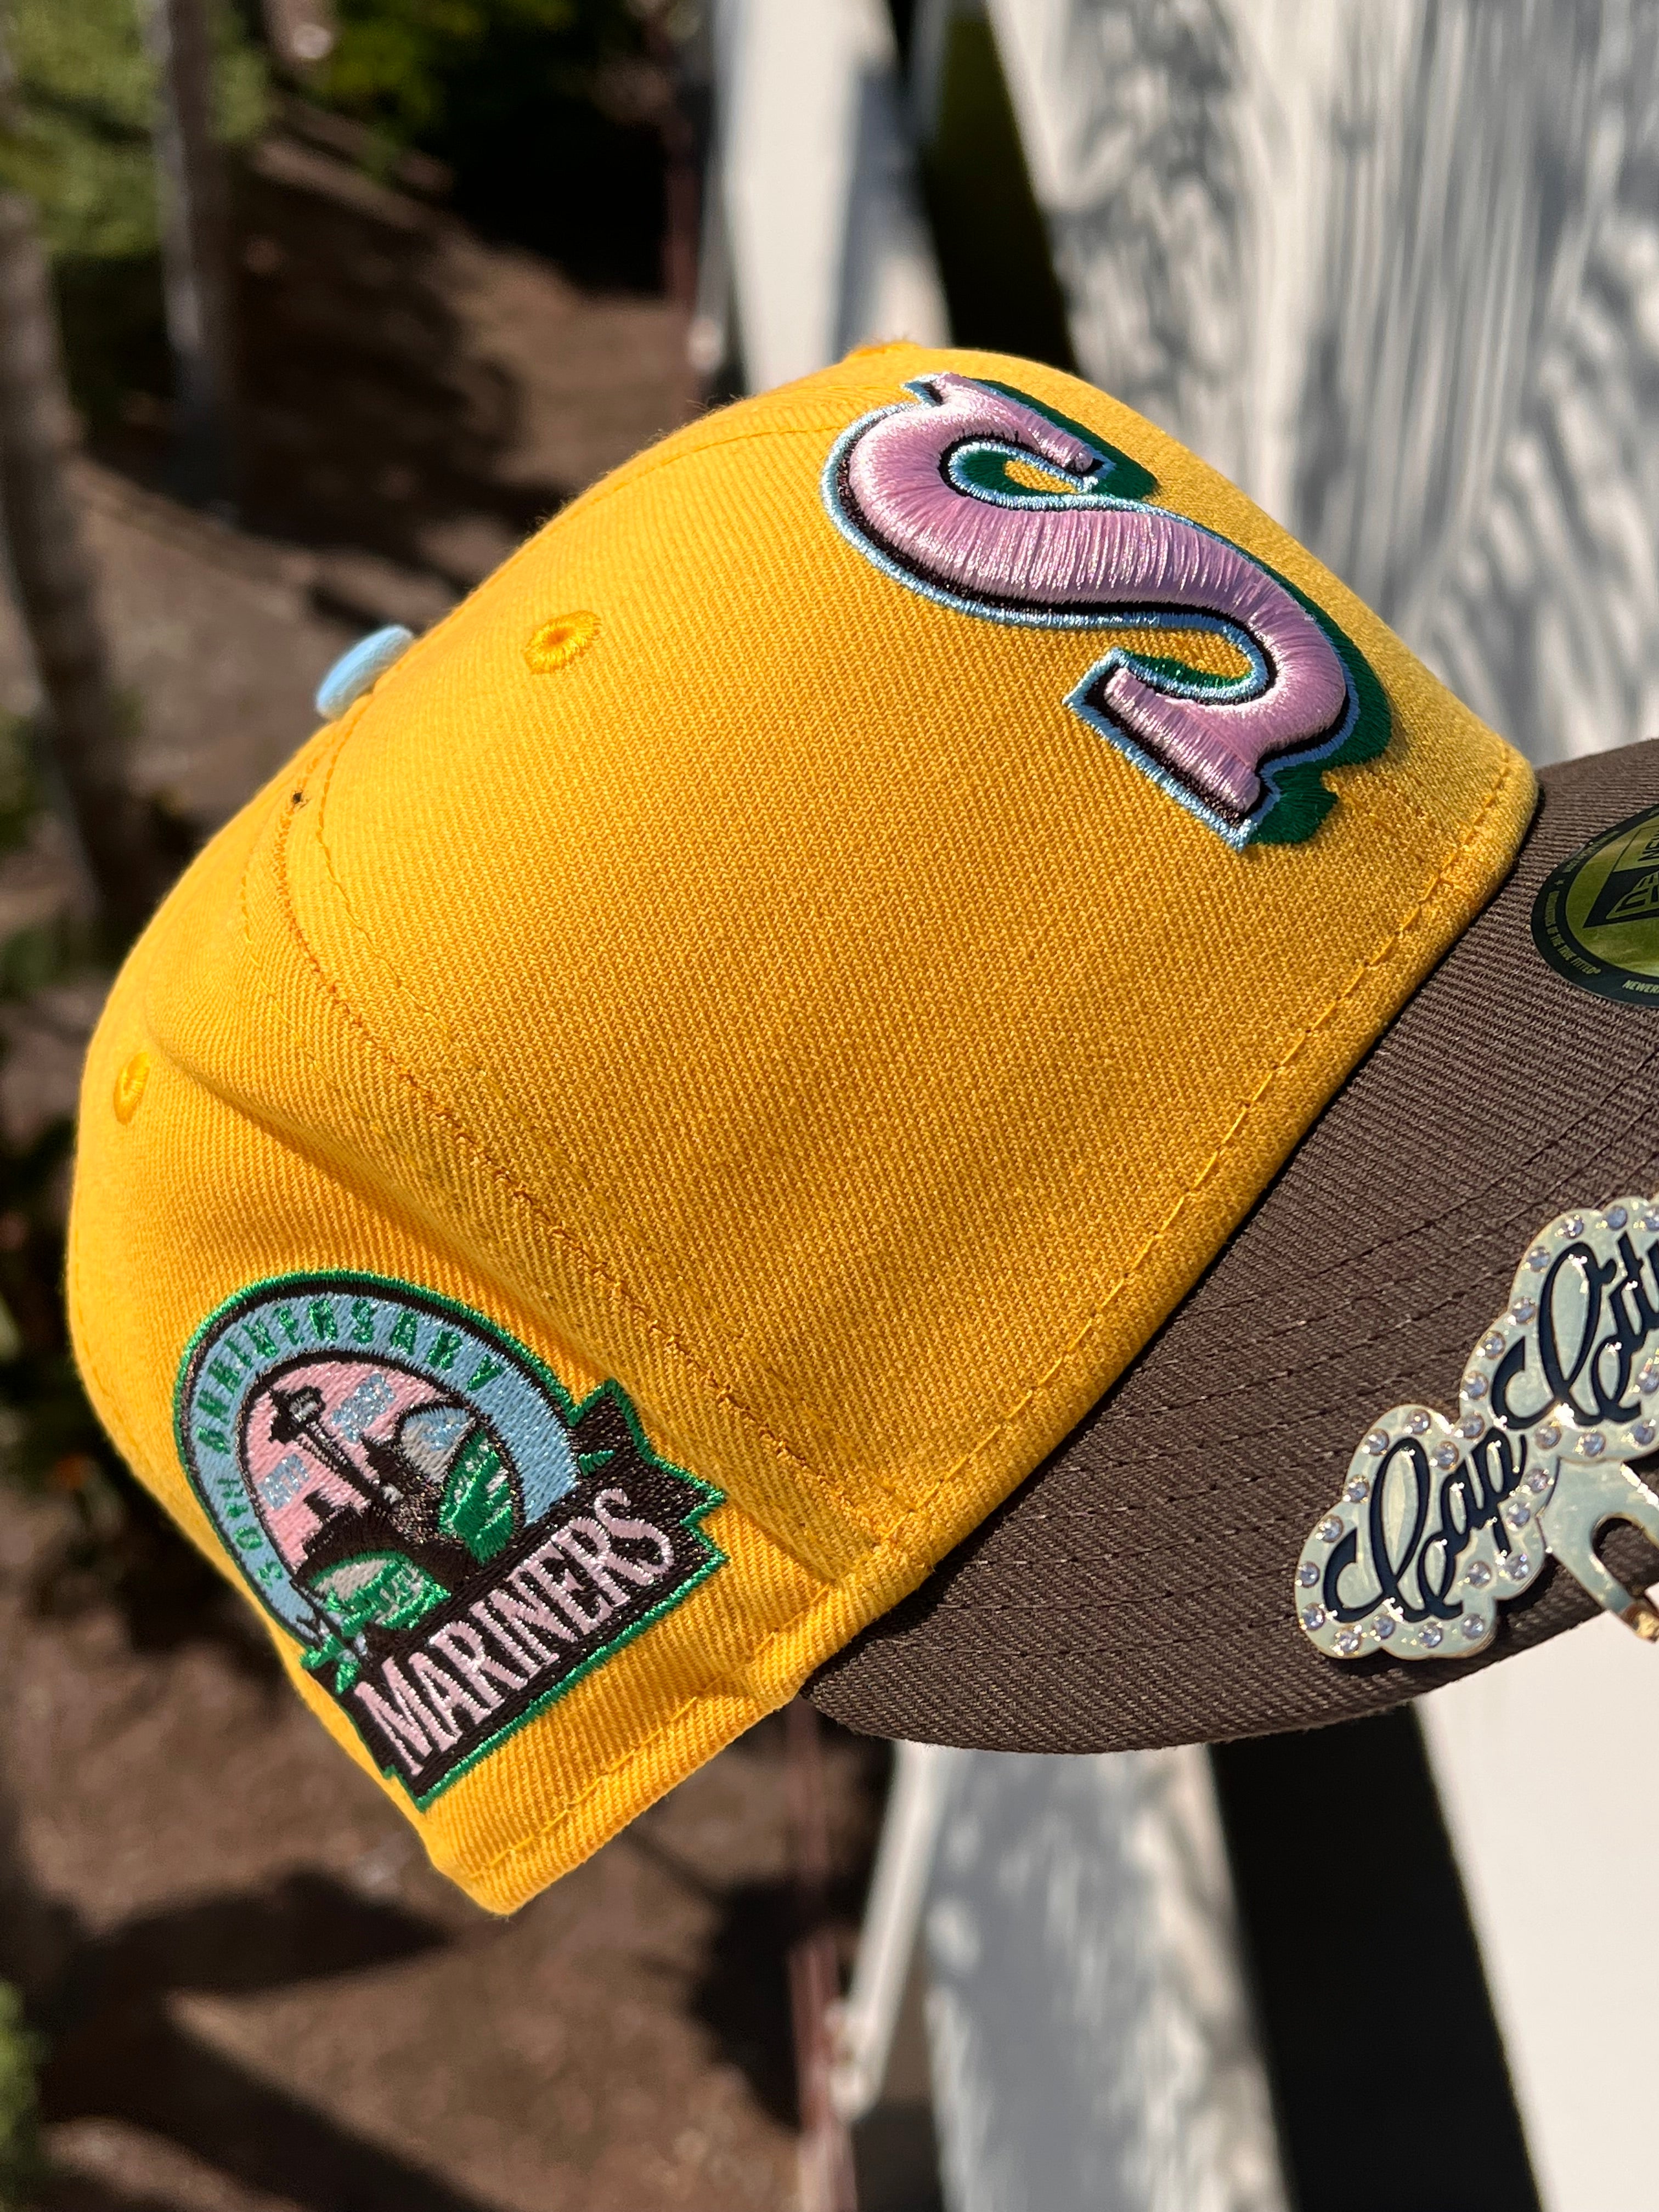 NEW ERA EXCLUSIVE 59FIFTY YELLOW GOLD/WALNUT SEATTLE MARINERS W/ 30TH ANNIVERSARY PATCH